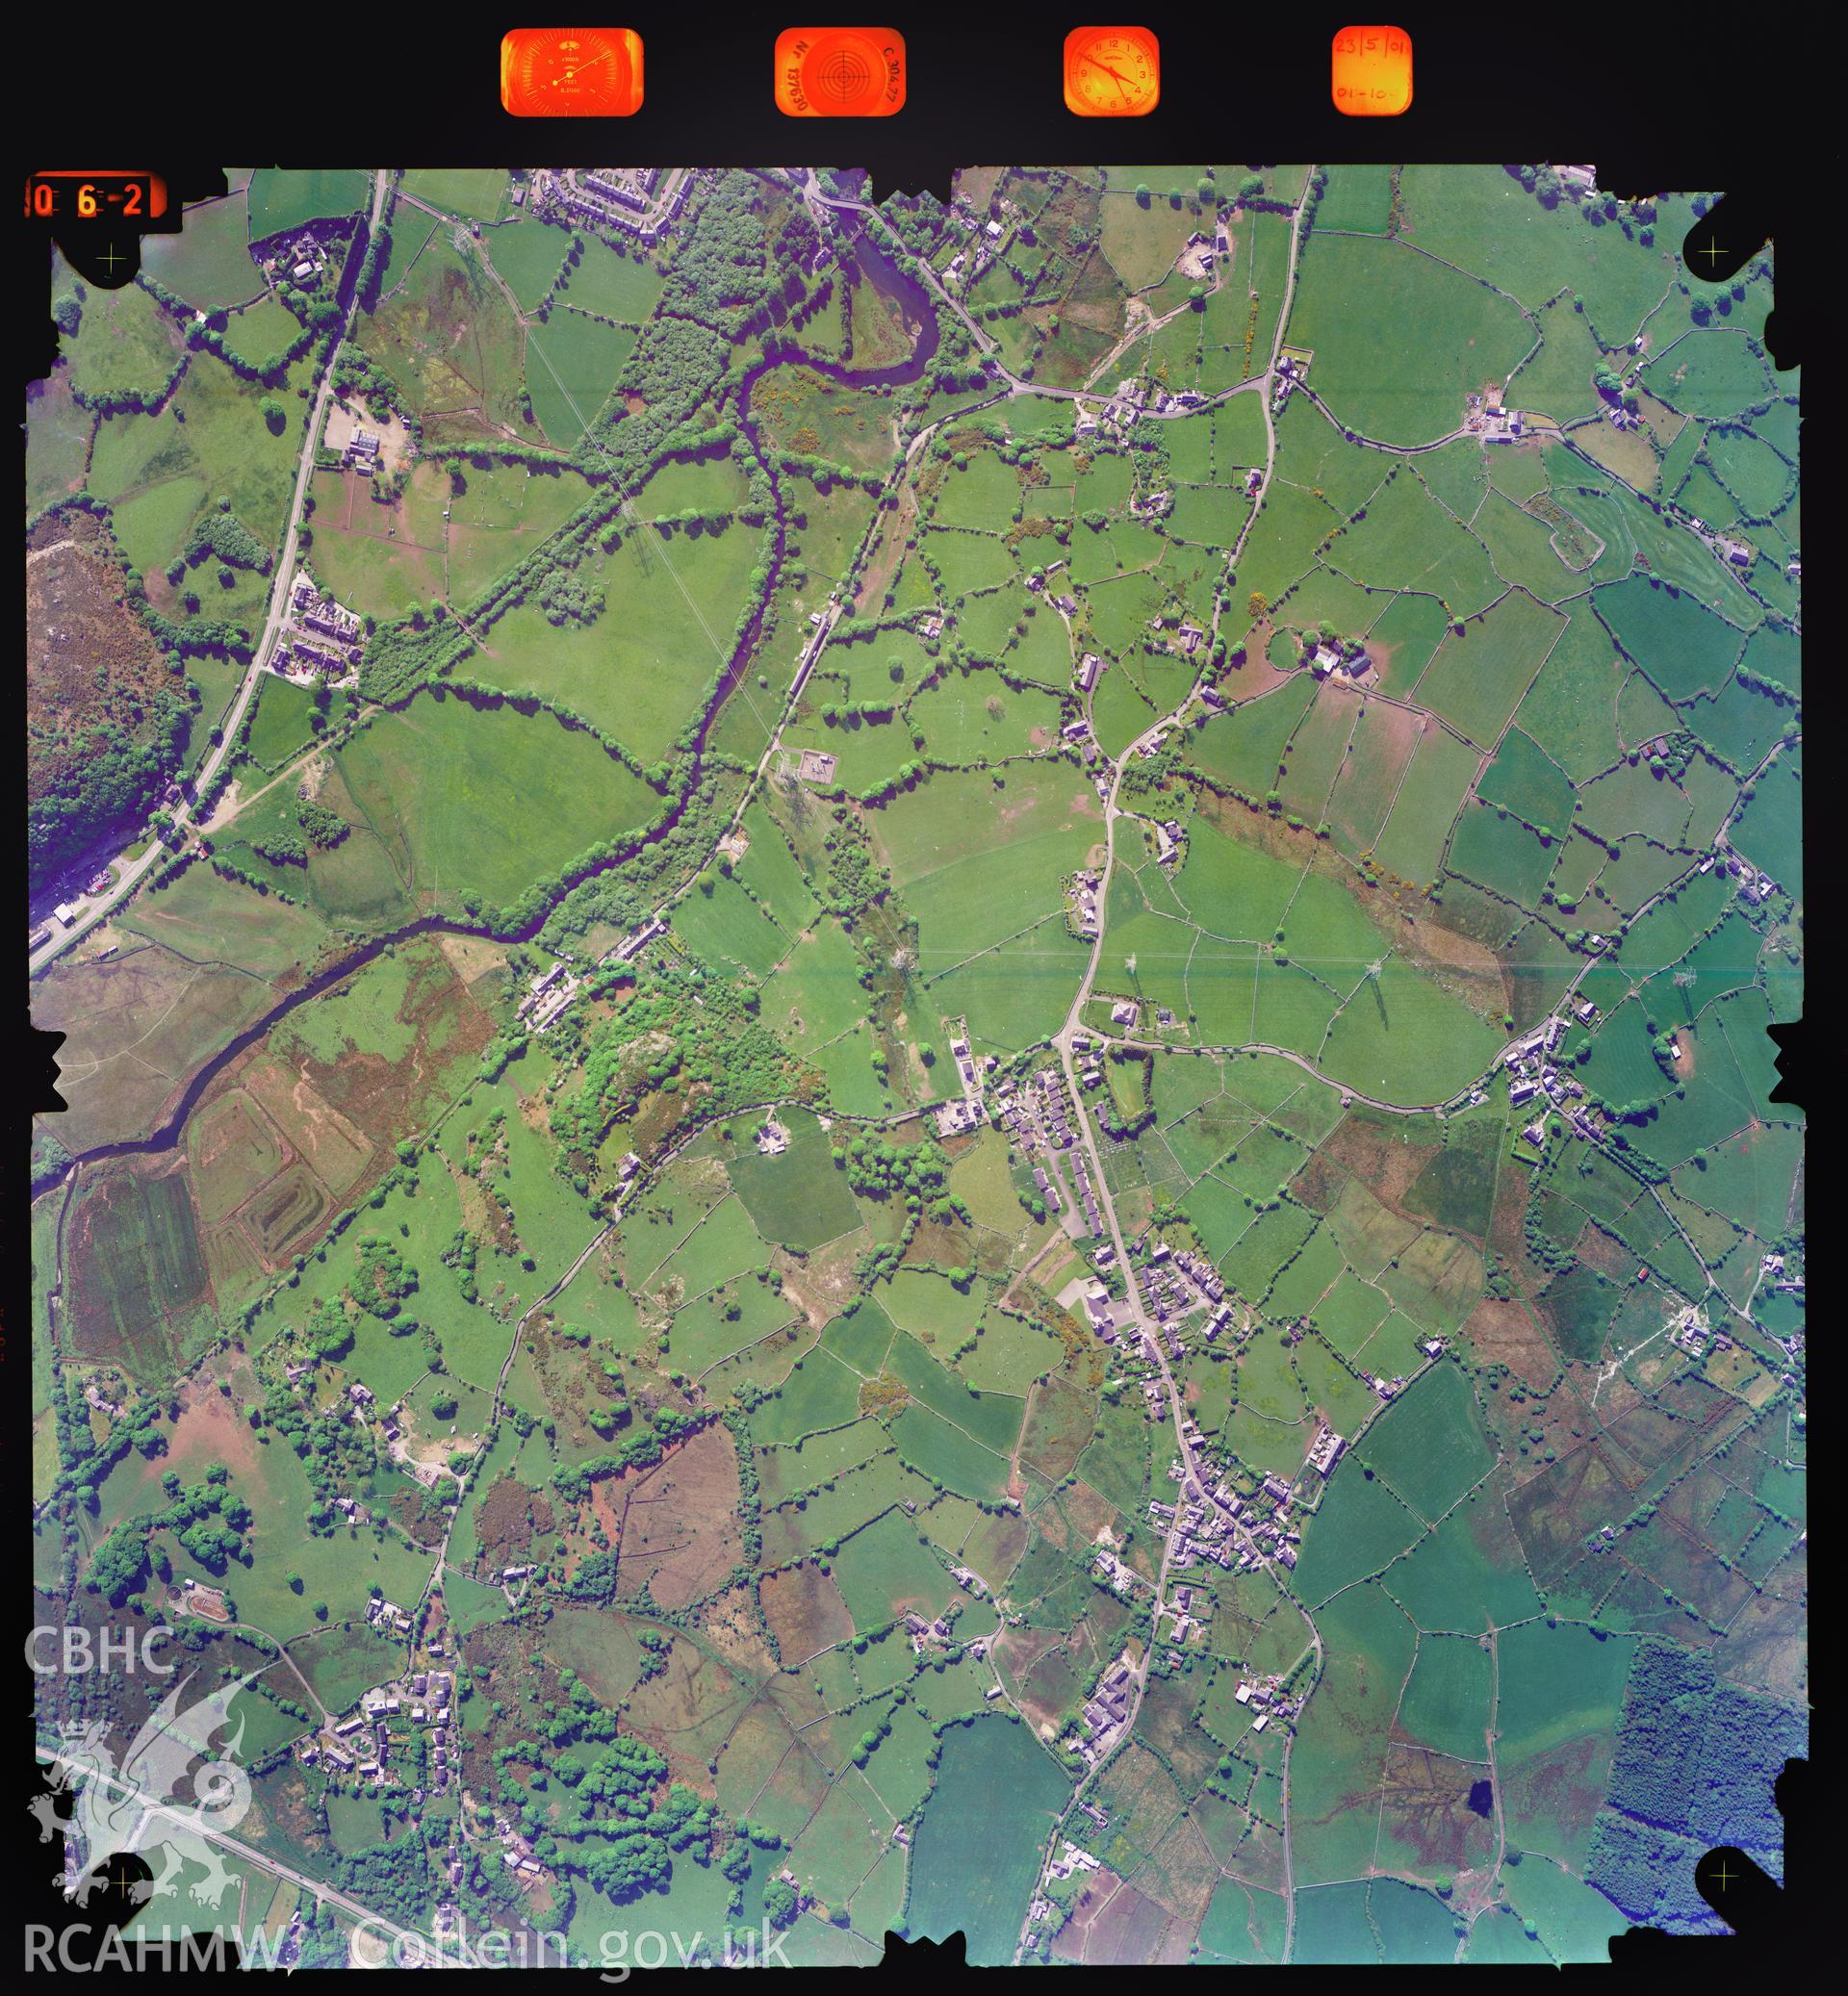 Digitized copy of an aerial photograph showing the Cwm Glo area, taken by Ordnance Survey, 2001.